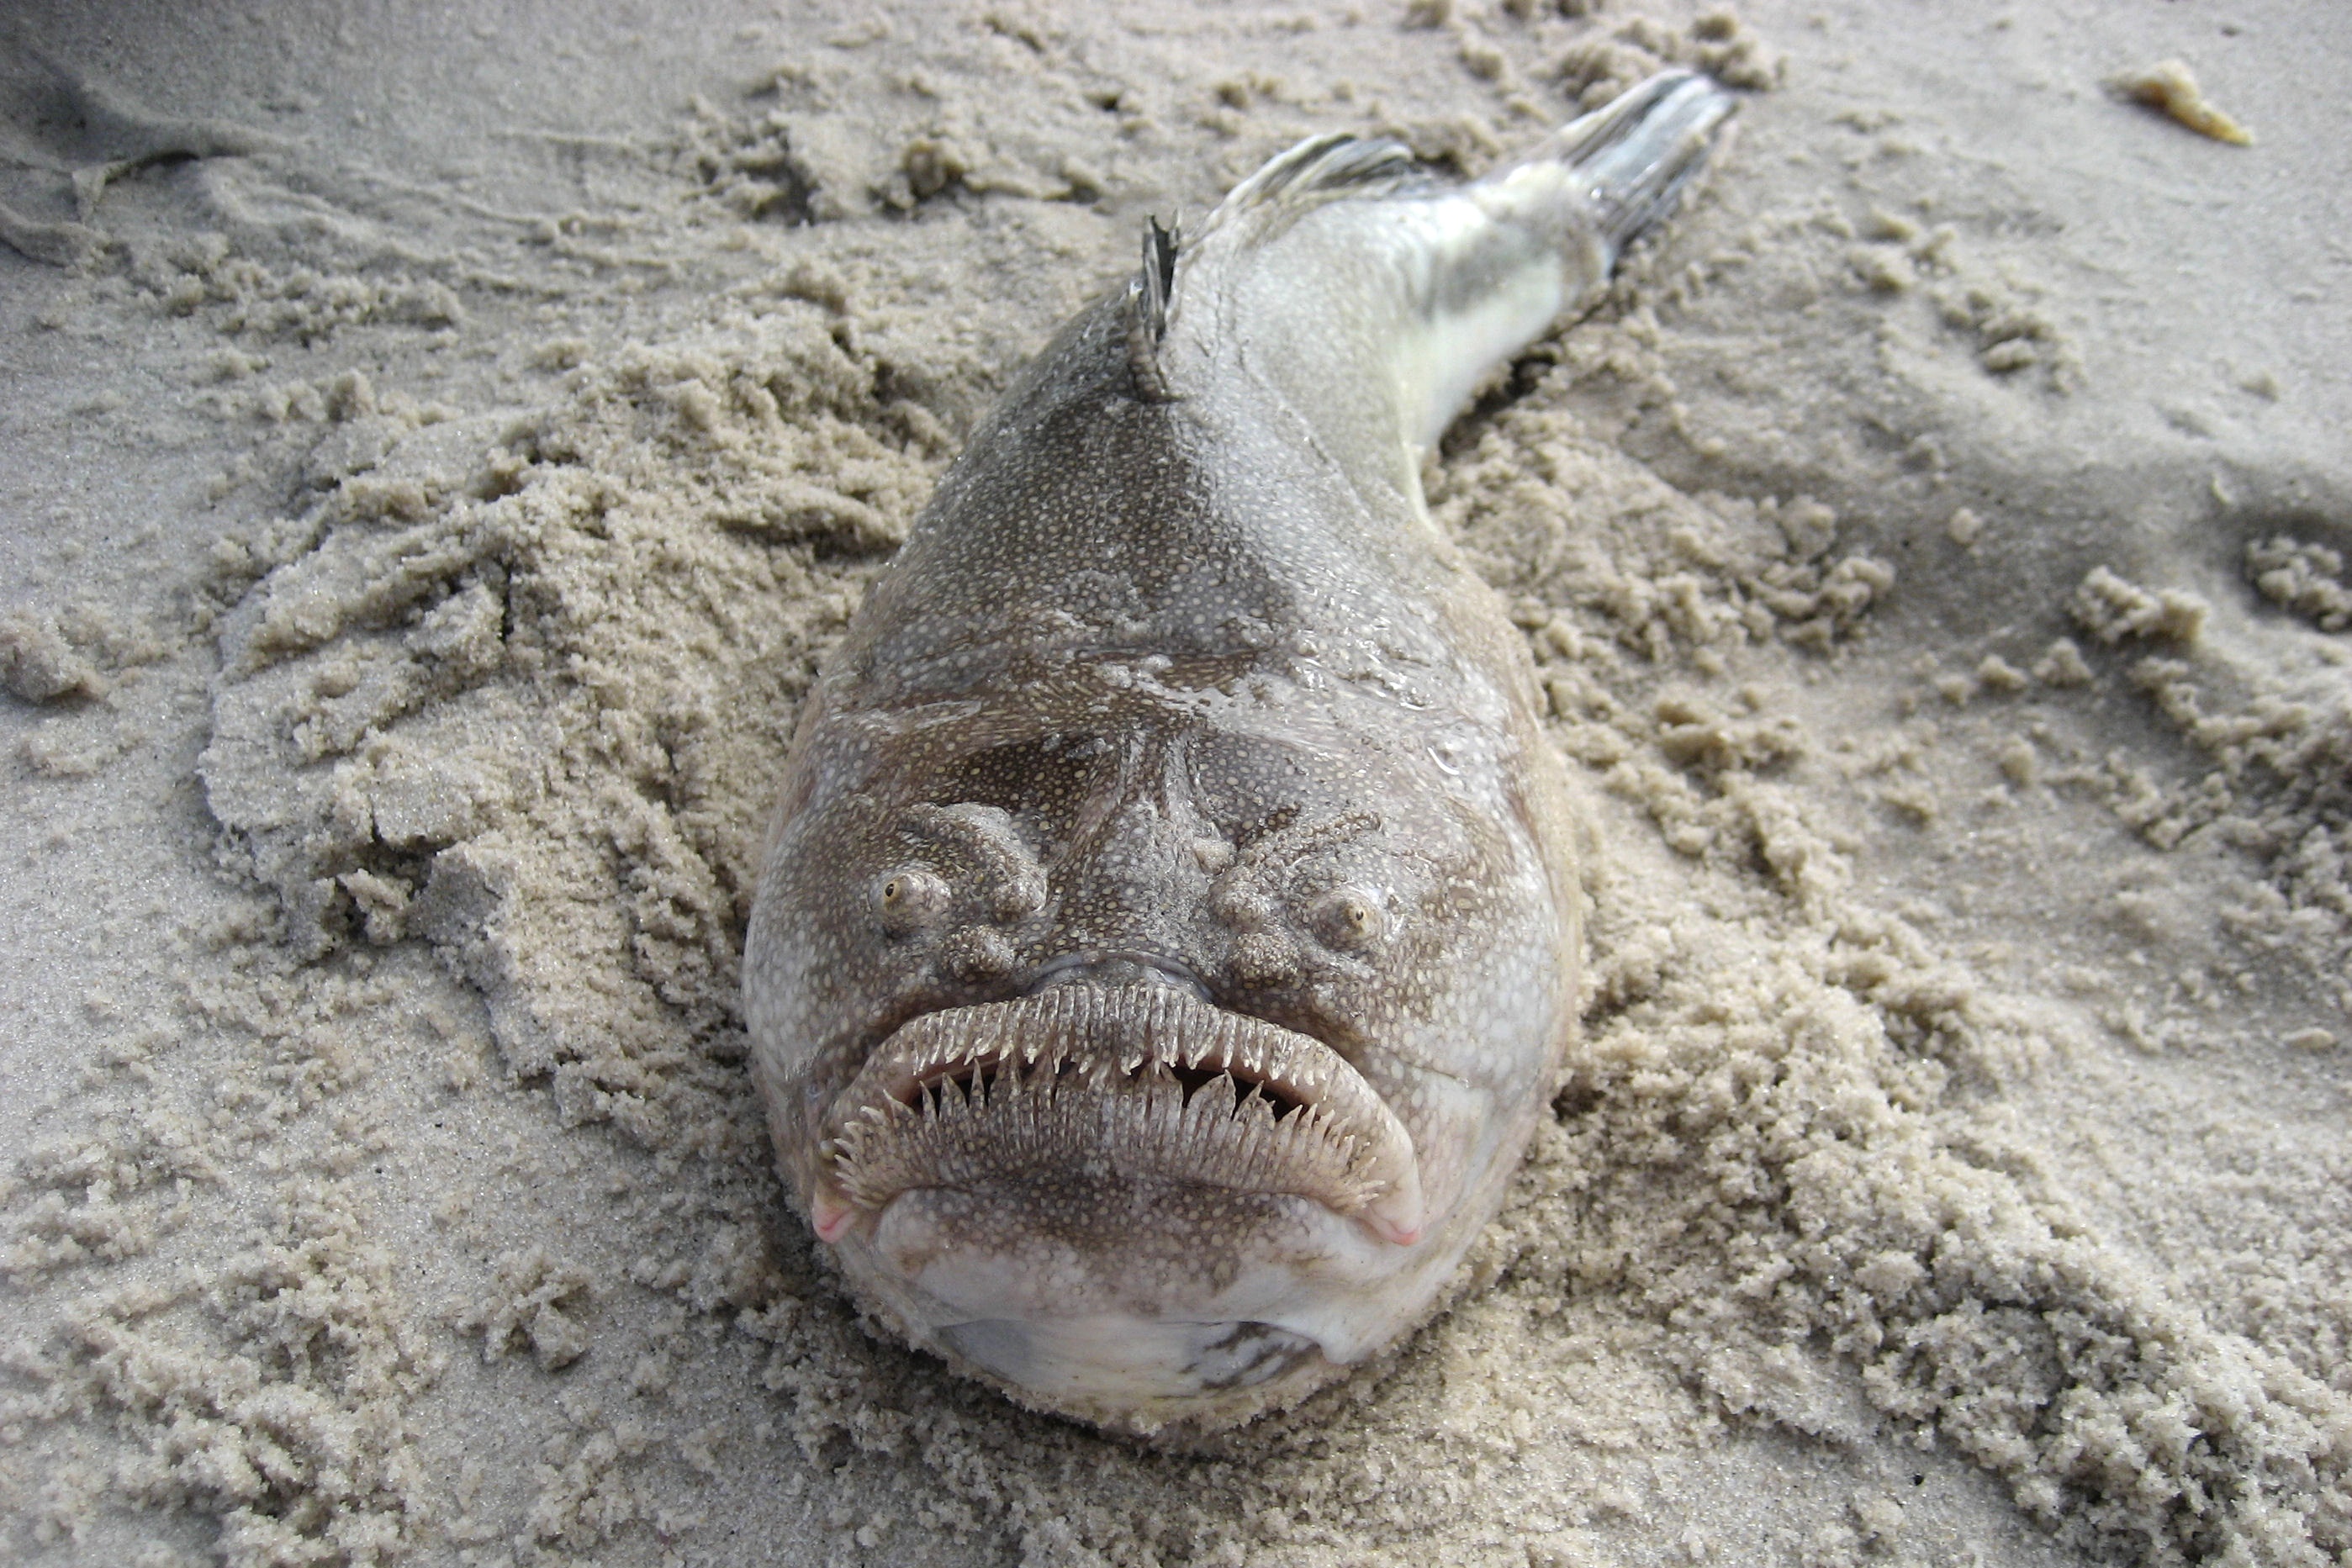 Top 10 Ugliest Fish in the World - the stargazer fish